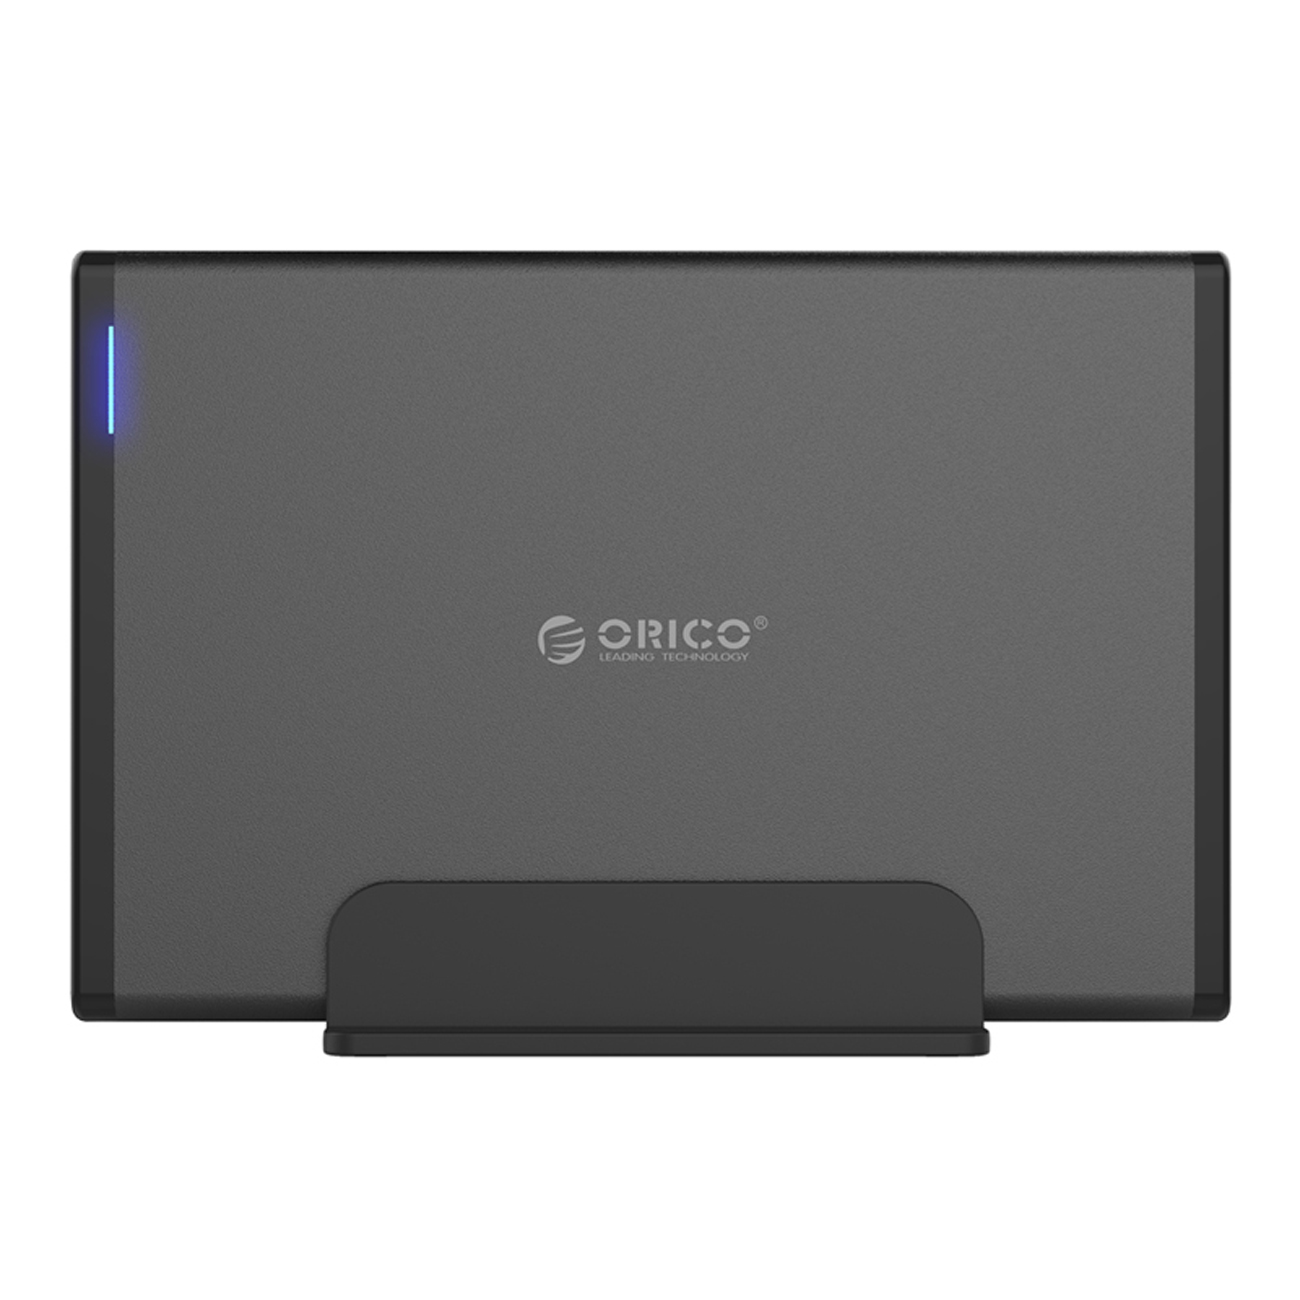 roduct image, side view: Orico 3.5 inch USB3.0 External Hard Drive Enclosure